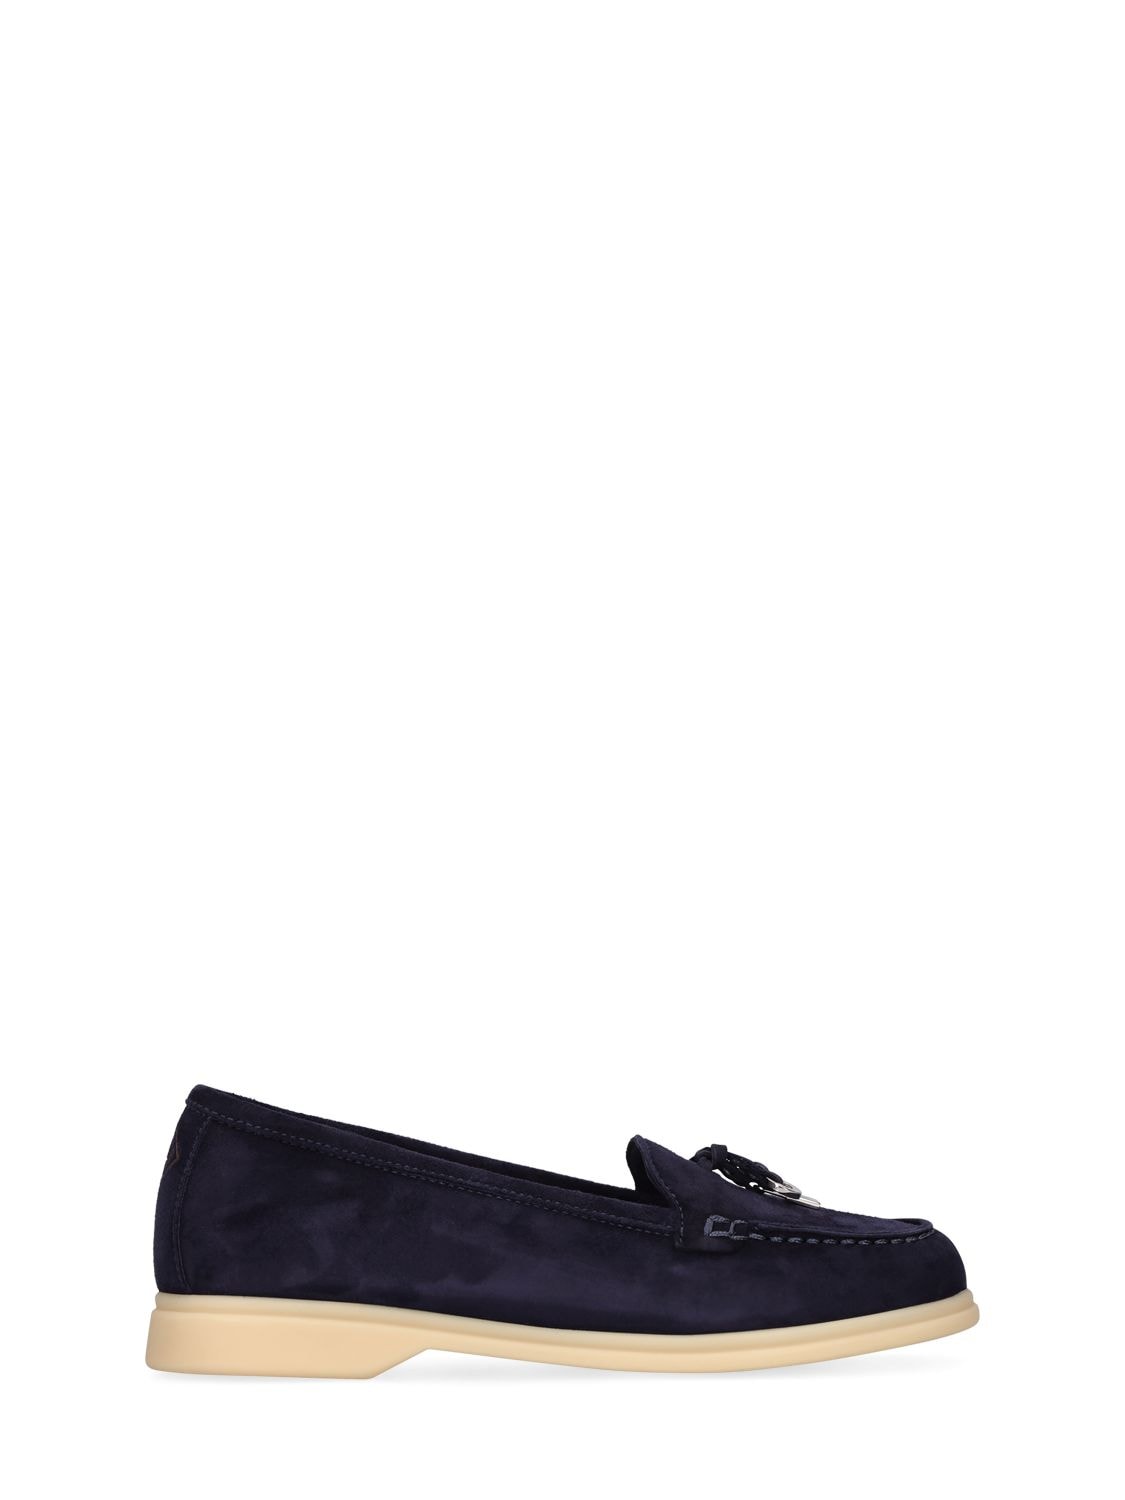 Loro Piana Kids' Suede Loafers W/ Charms In Navy